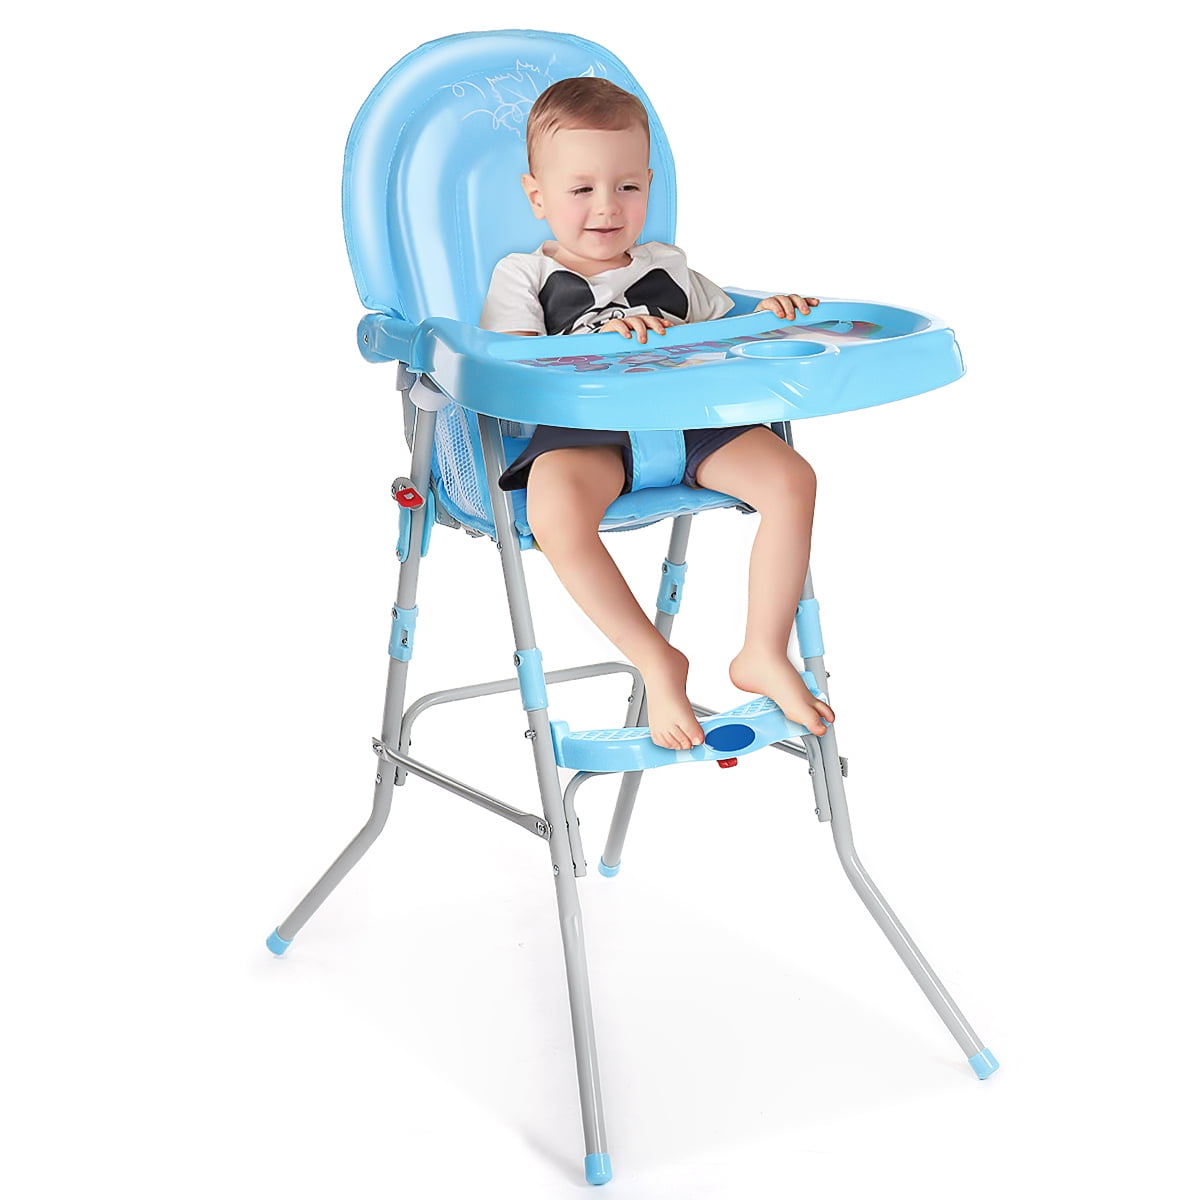 3-in-1 Cozy Baby High Chair & Toddler Chair - Simple Convertible Highchair Folding Dining Chair for Infants & Toddlers - Blue